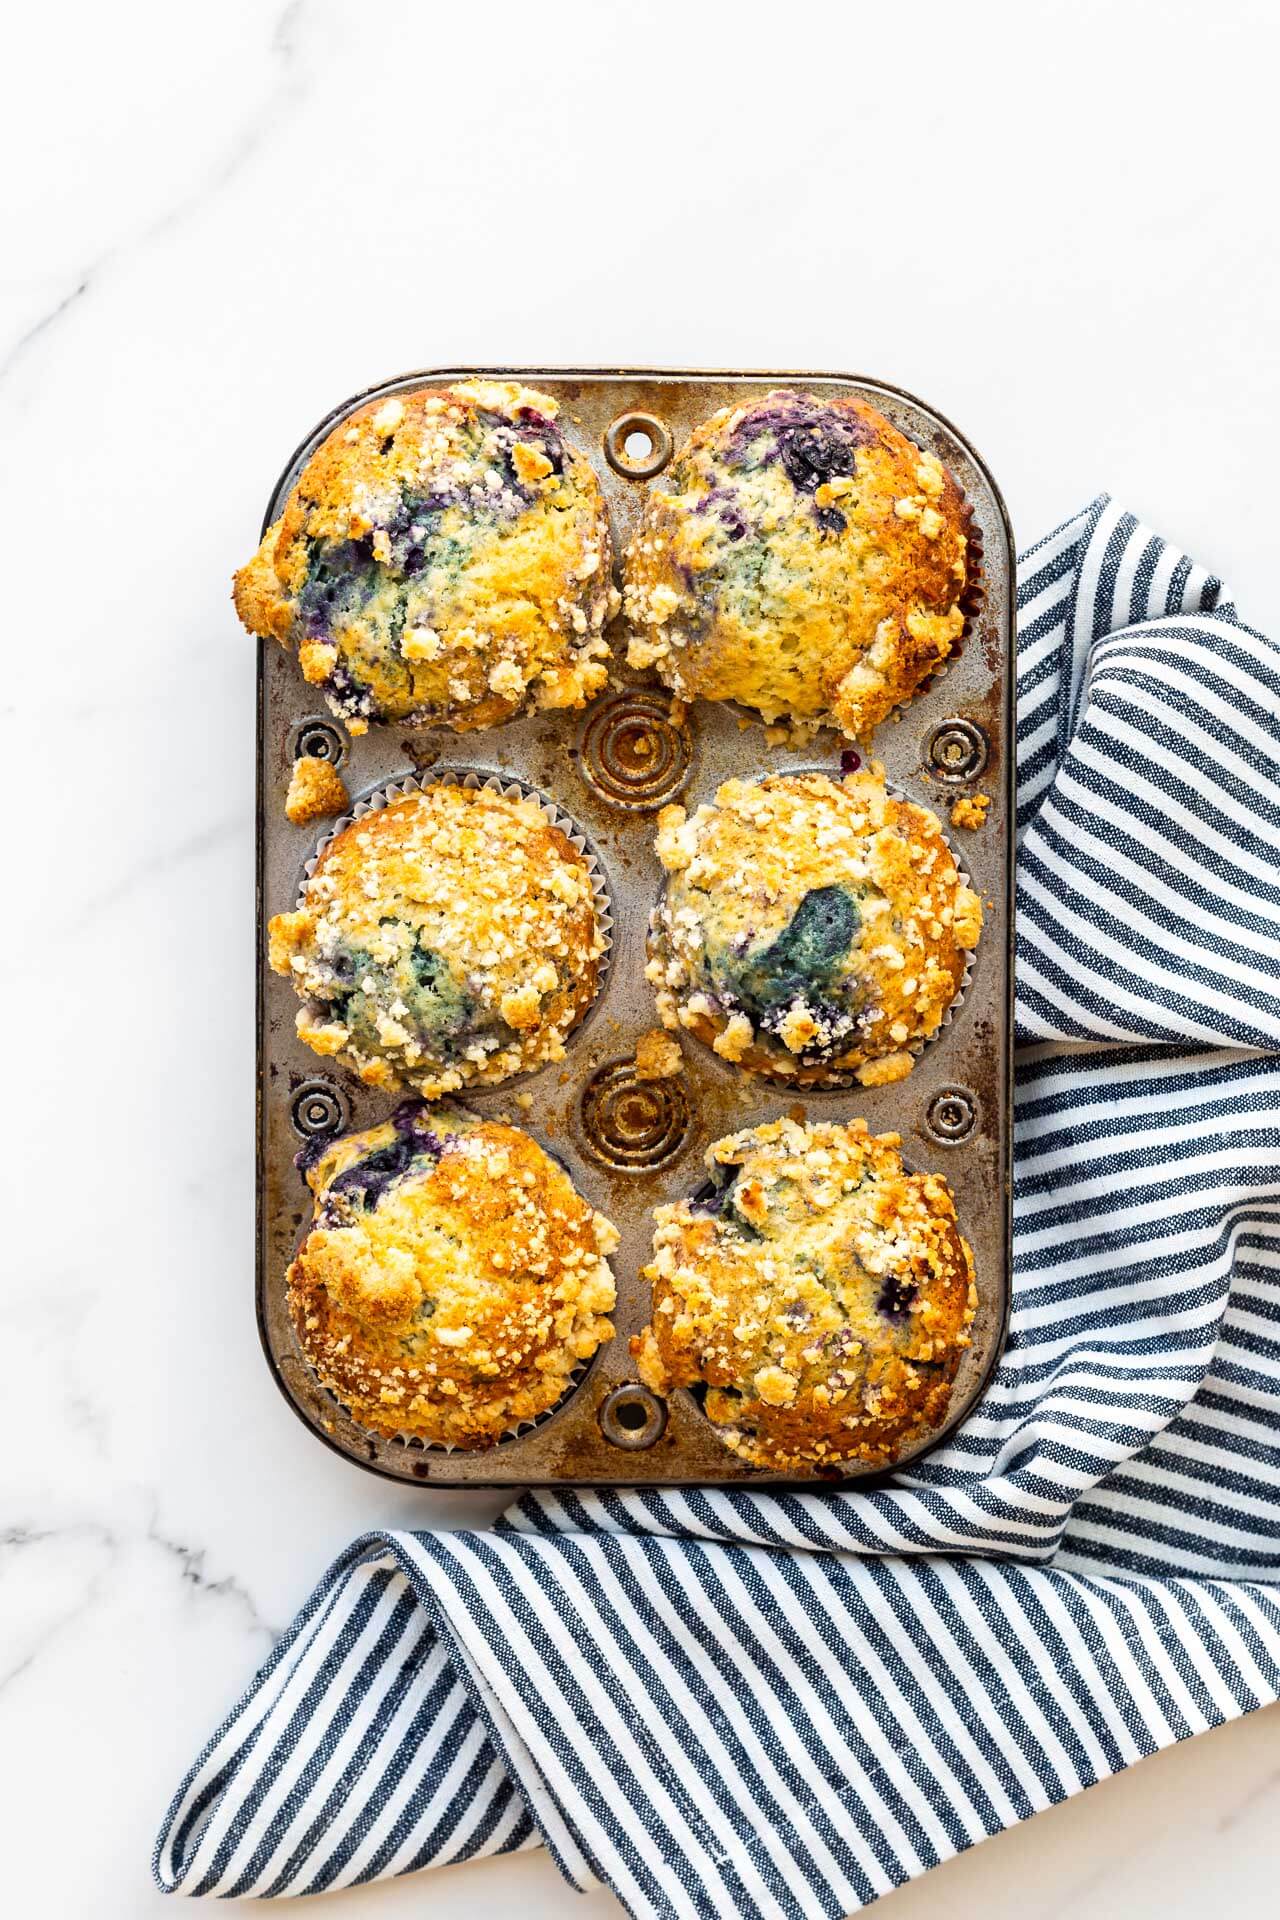 A vintage muffin pan with freshly baked blueberry streusel muffins with a stripped blue and white kitchen linen